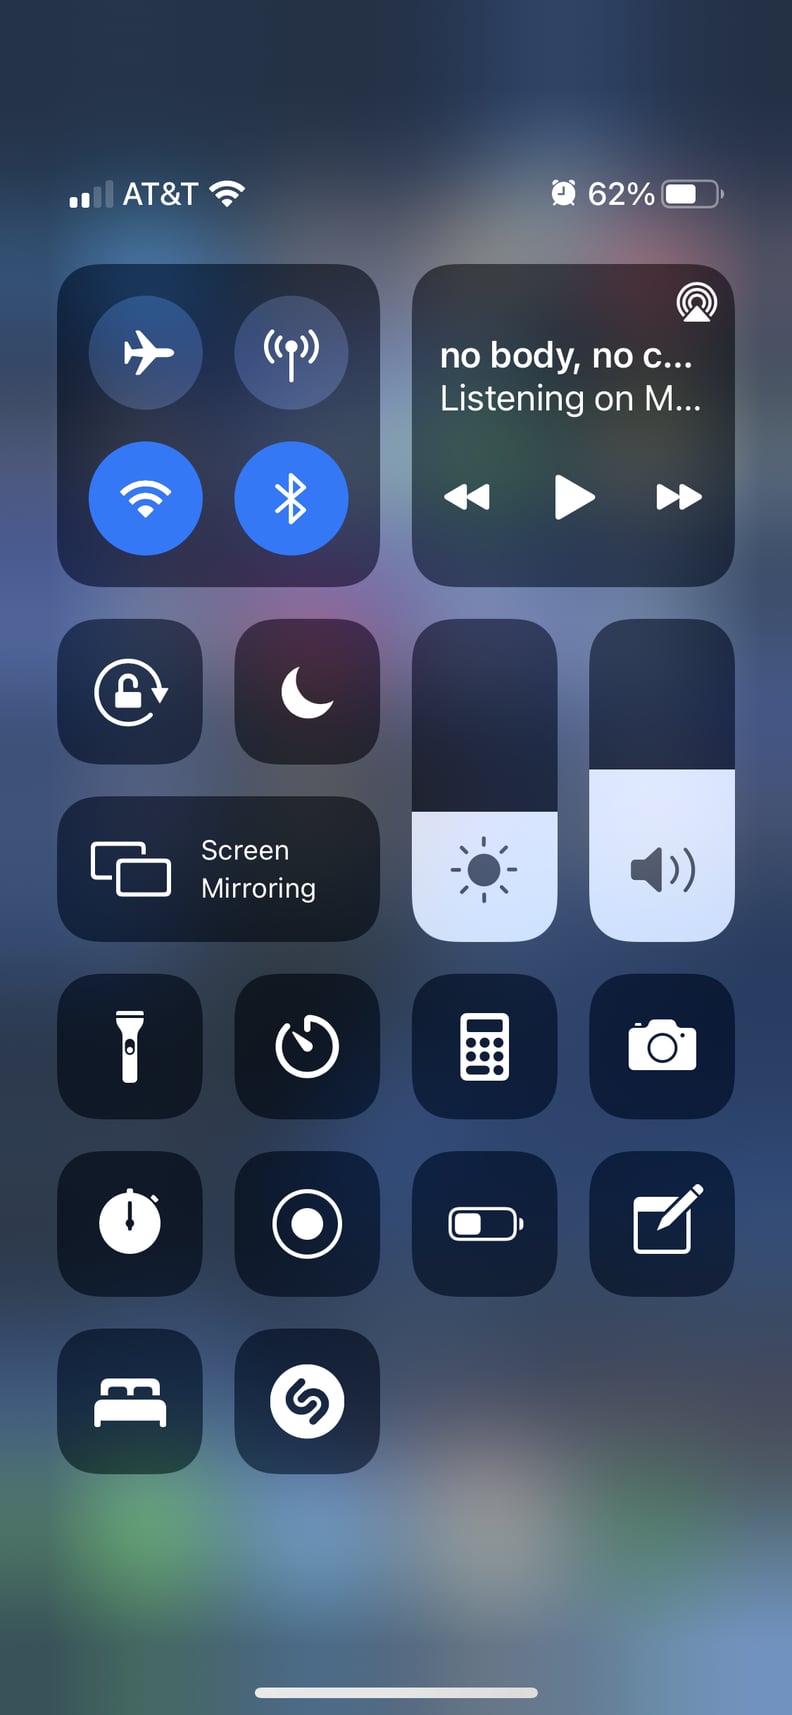 Open Your Control Center and You'll See the Shazam App